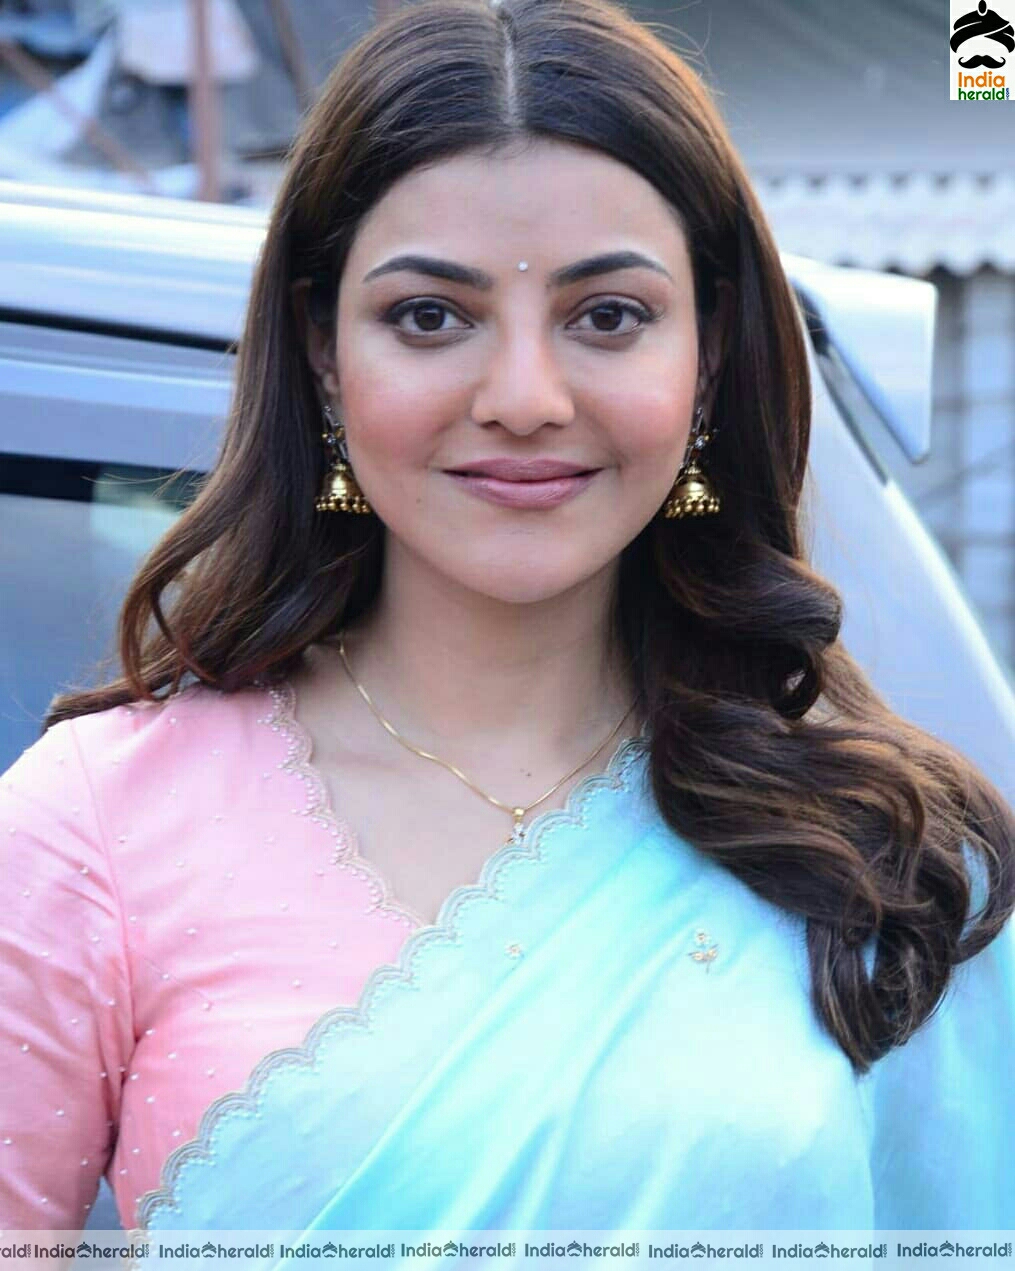 Kajal Aggarwal looking gorgeous like a Barbie doll in saree